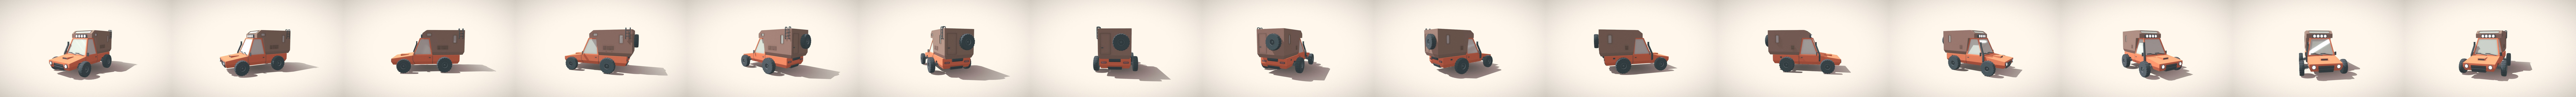 Low Poly Truck Drifter Download Free 3d Model By Ivan Norman Vanidza E56ee98 Sketchfab - lowpoly drifting roblox